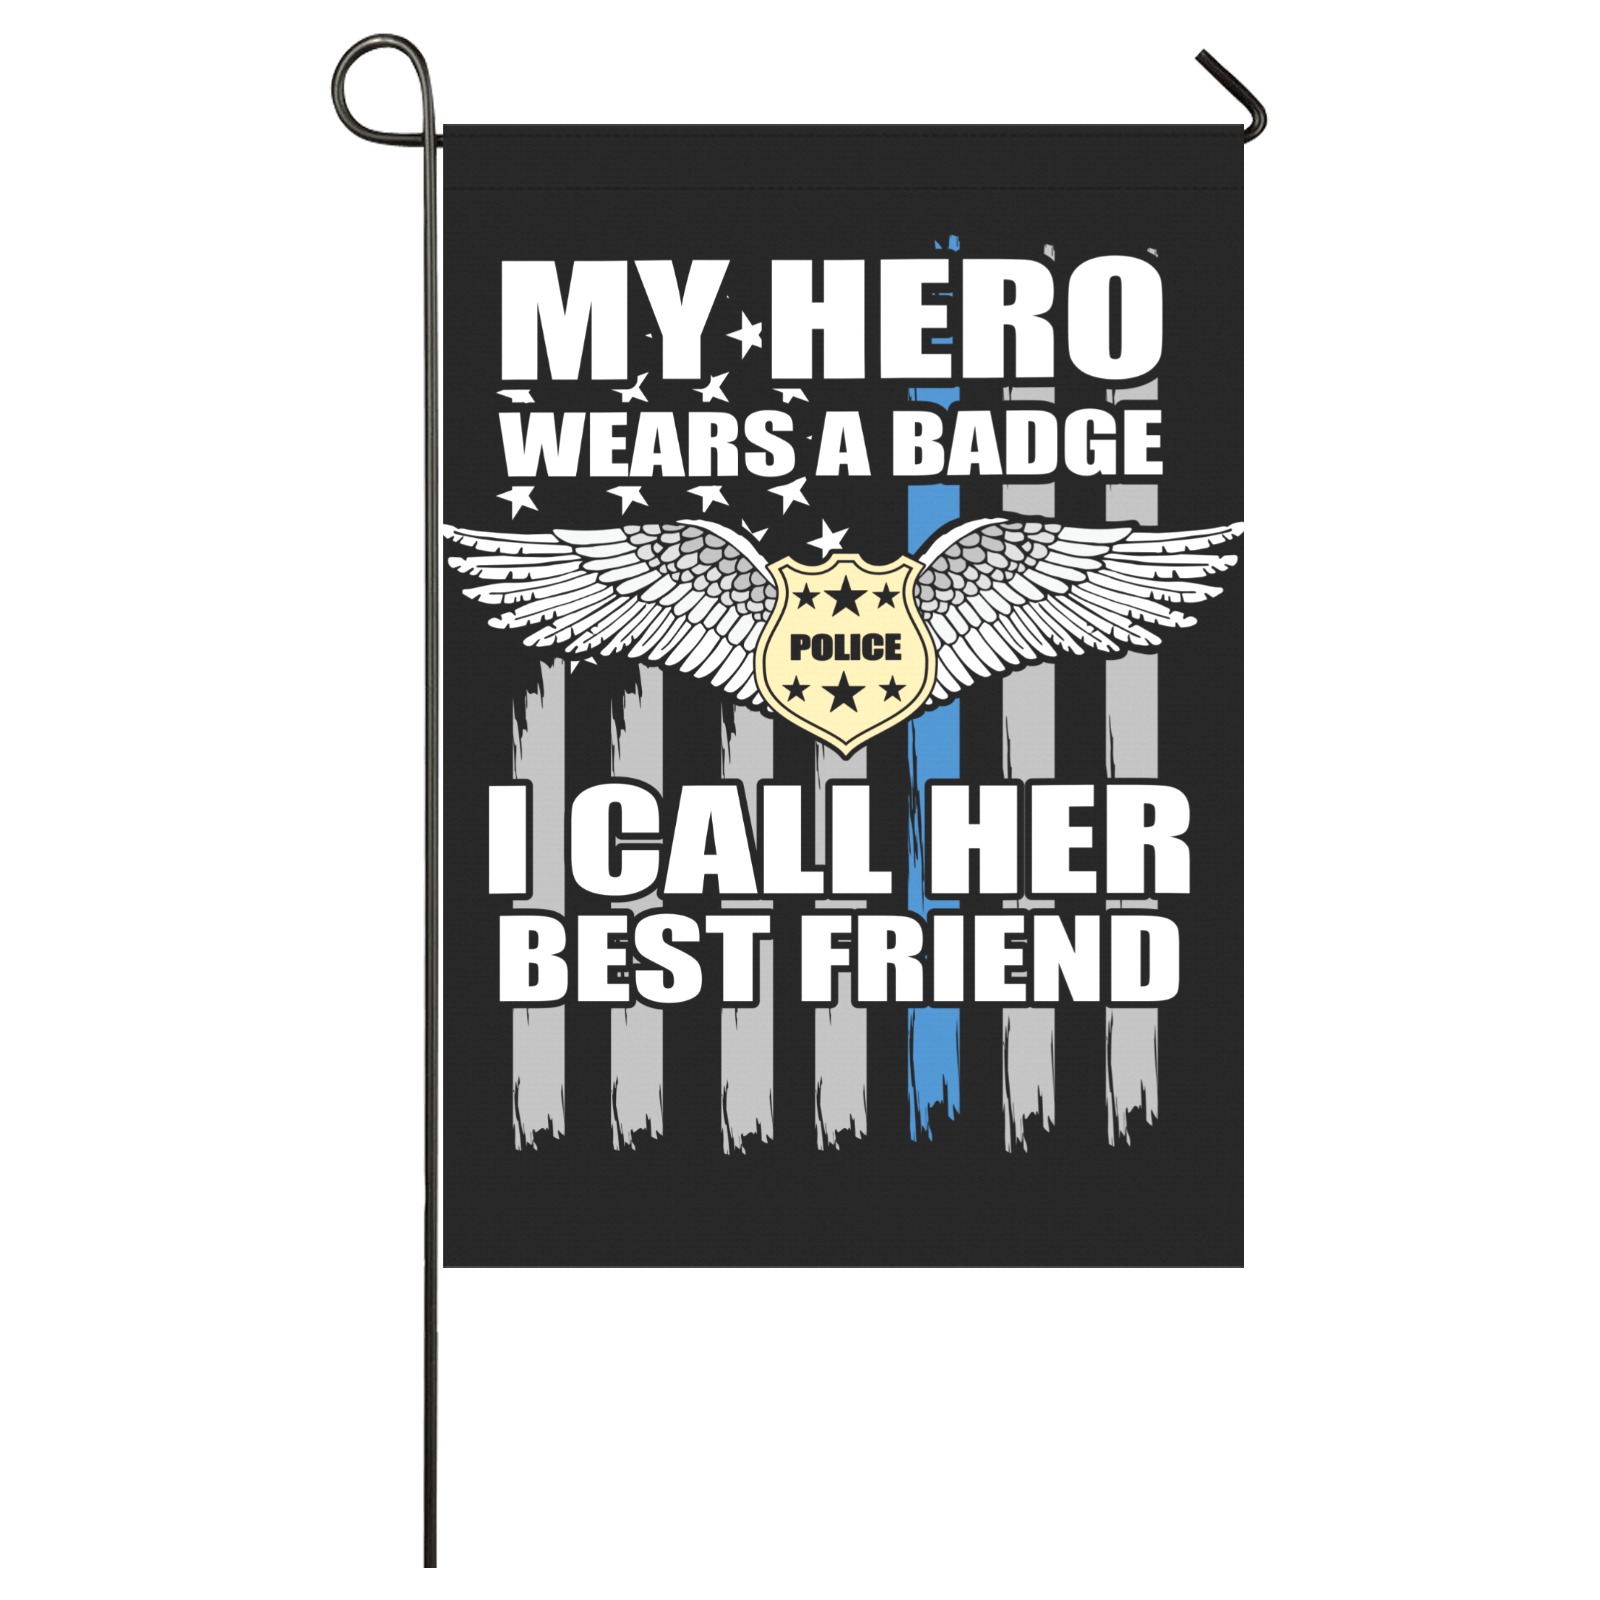 Best Friend Wears A Badge Garden Flag 28''x40'' （Without Flagpole）